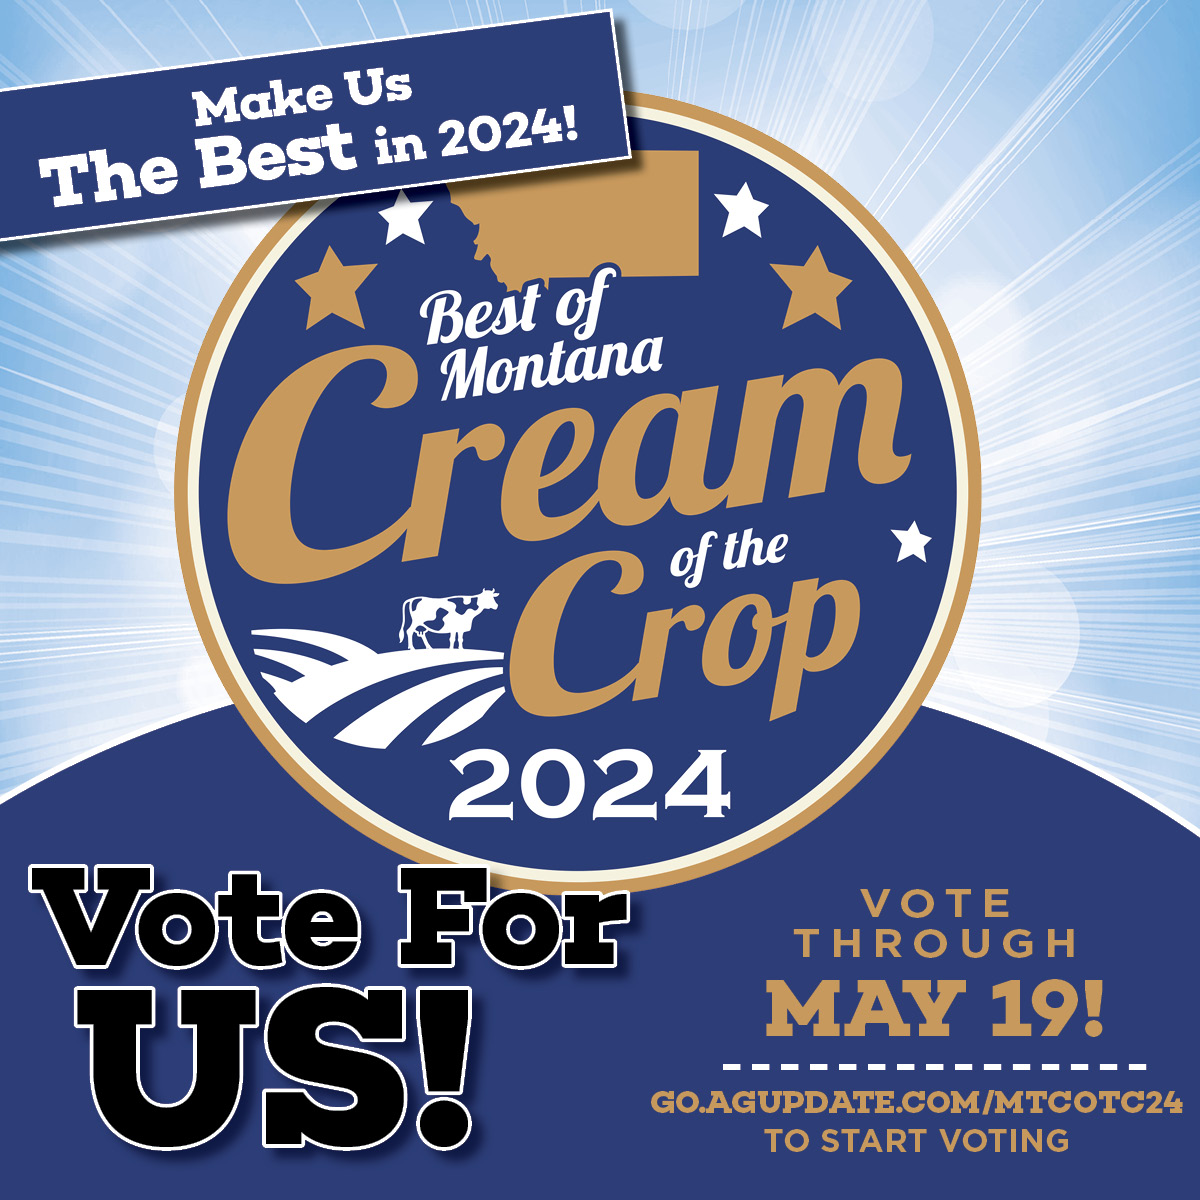 Montana Farmers Union is on the ballot for The Montana Cream of the Crop! Vote for us today and check out the other categories too! Find us in the Best Agricultural Organization / Association ow.ly/XGun50RphOc